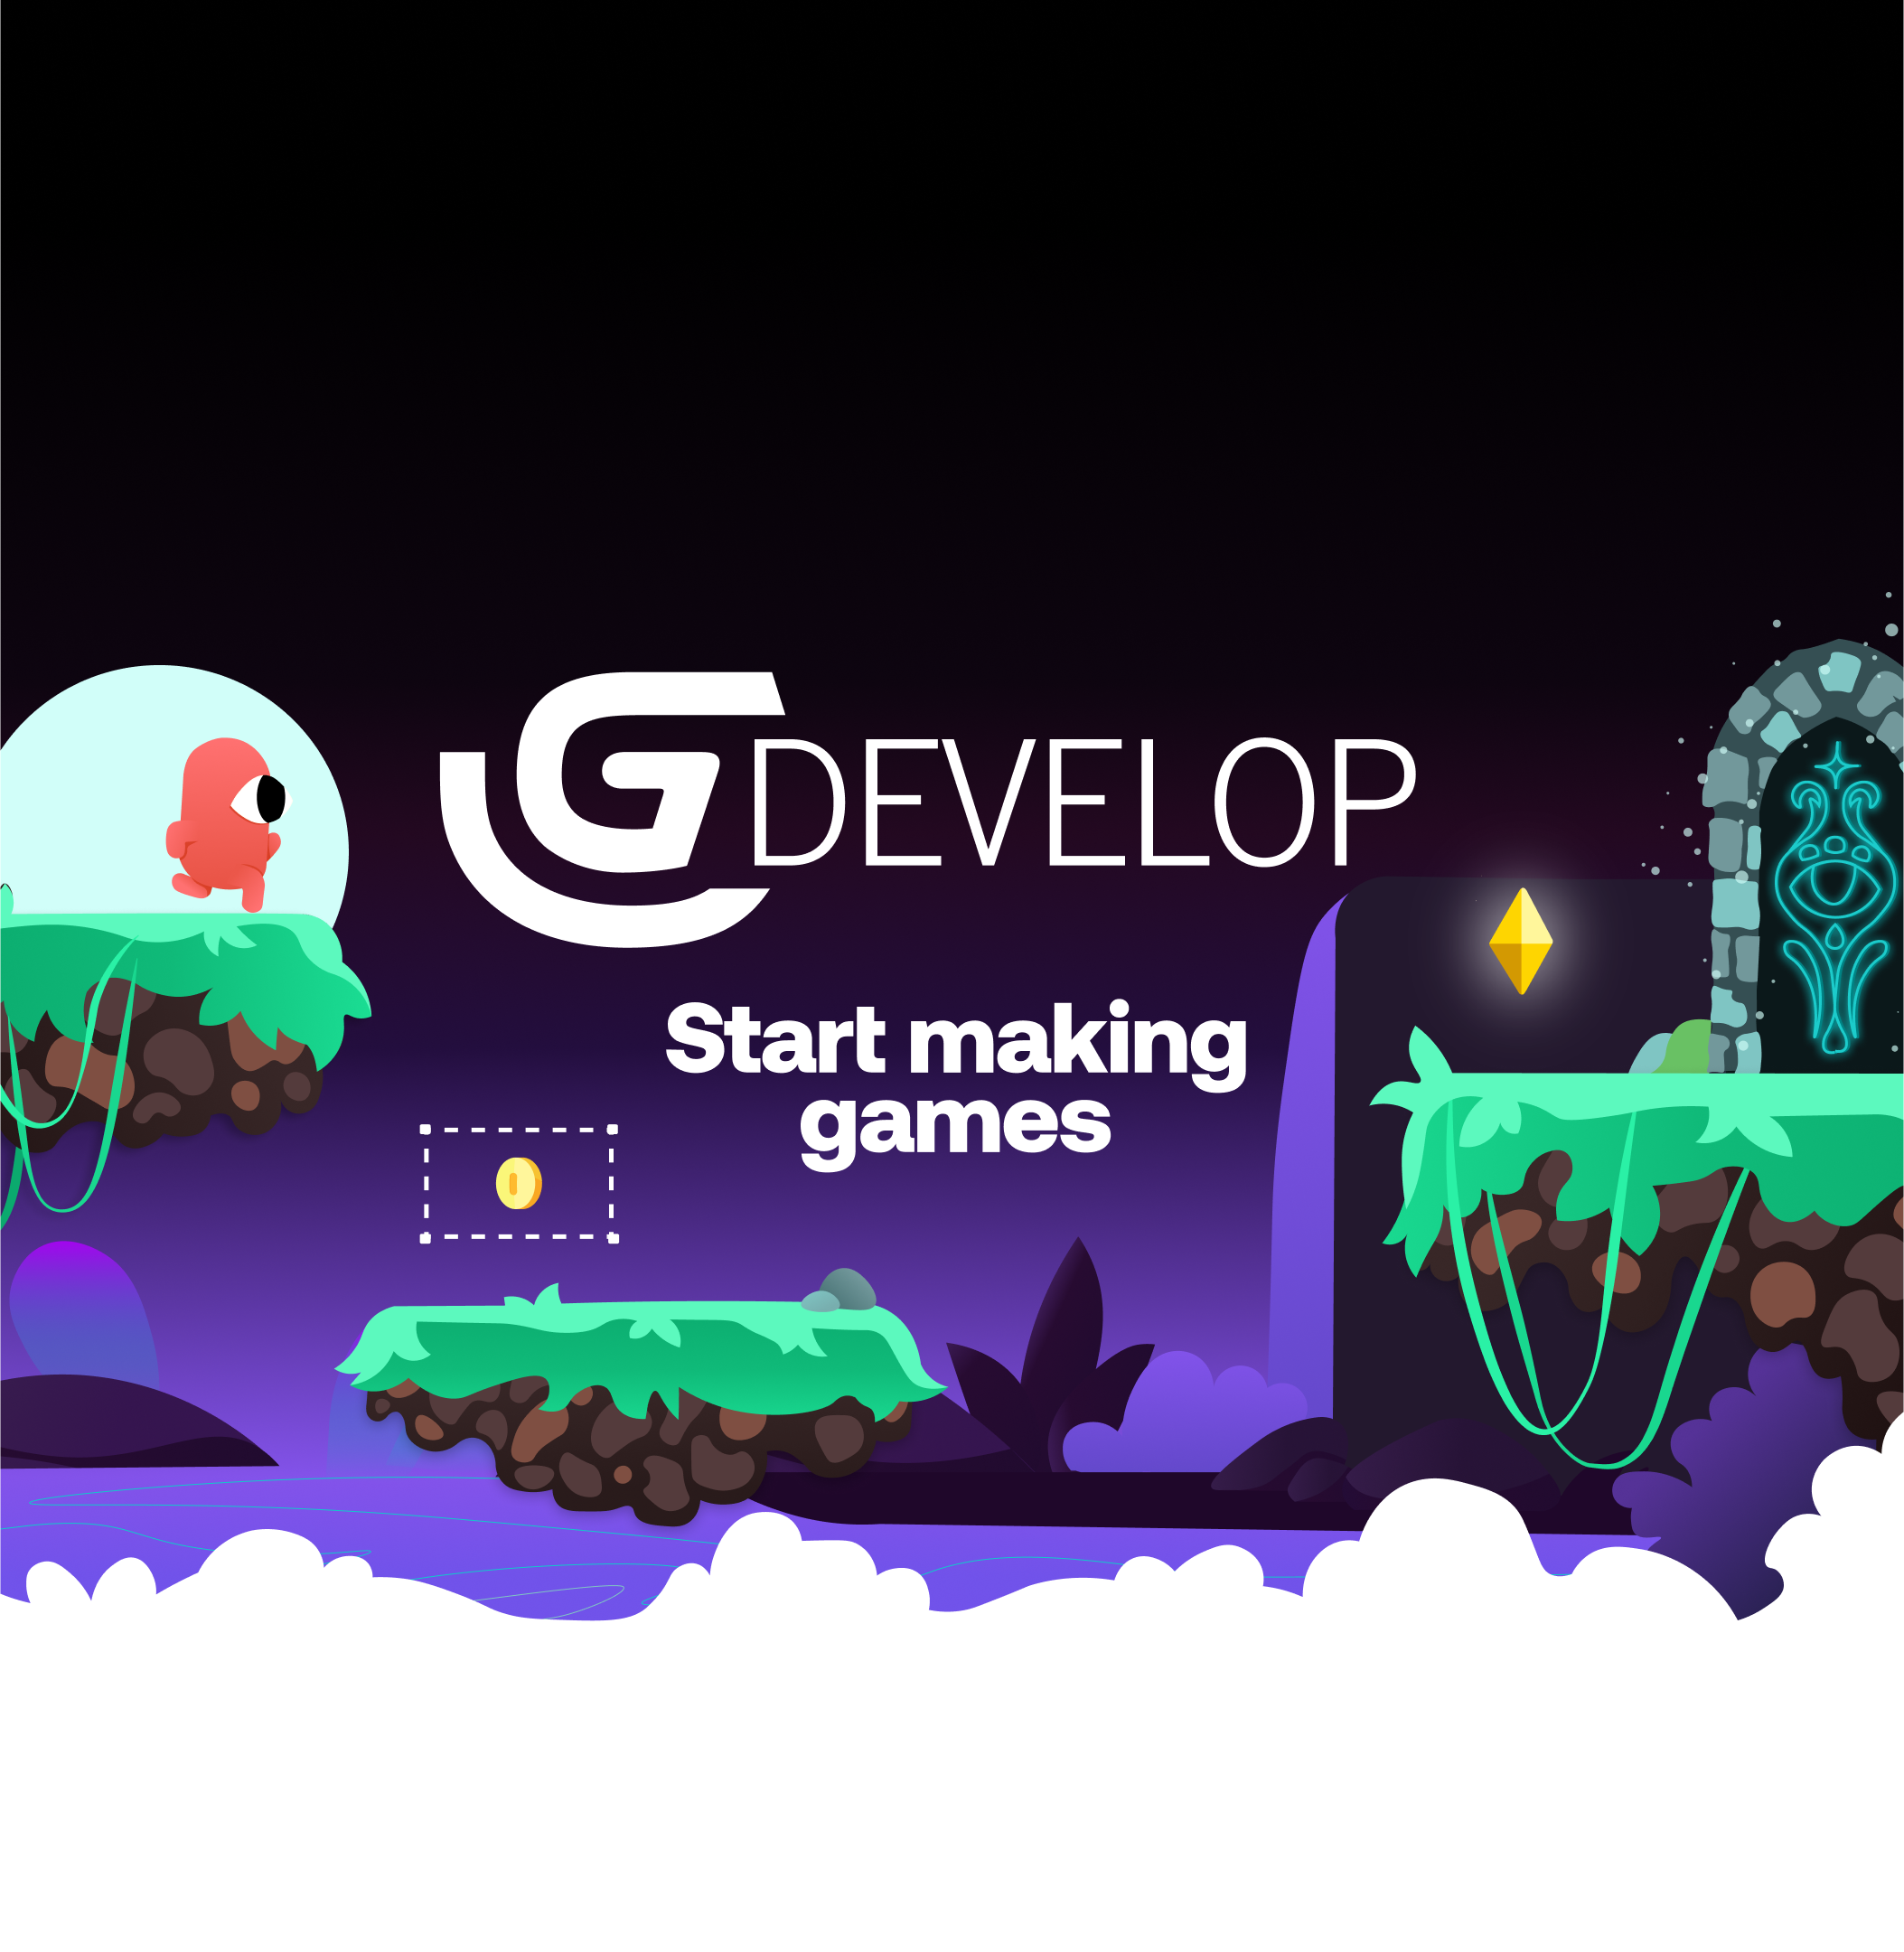 GDevelop: An open-source game creator that allows users to build games without any programming knowledge, using a visual interface.
Stencyl: A game development tool that focuses on creating games for mobile devices and offers a drag-and-drop interface for easy game creation.